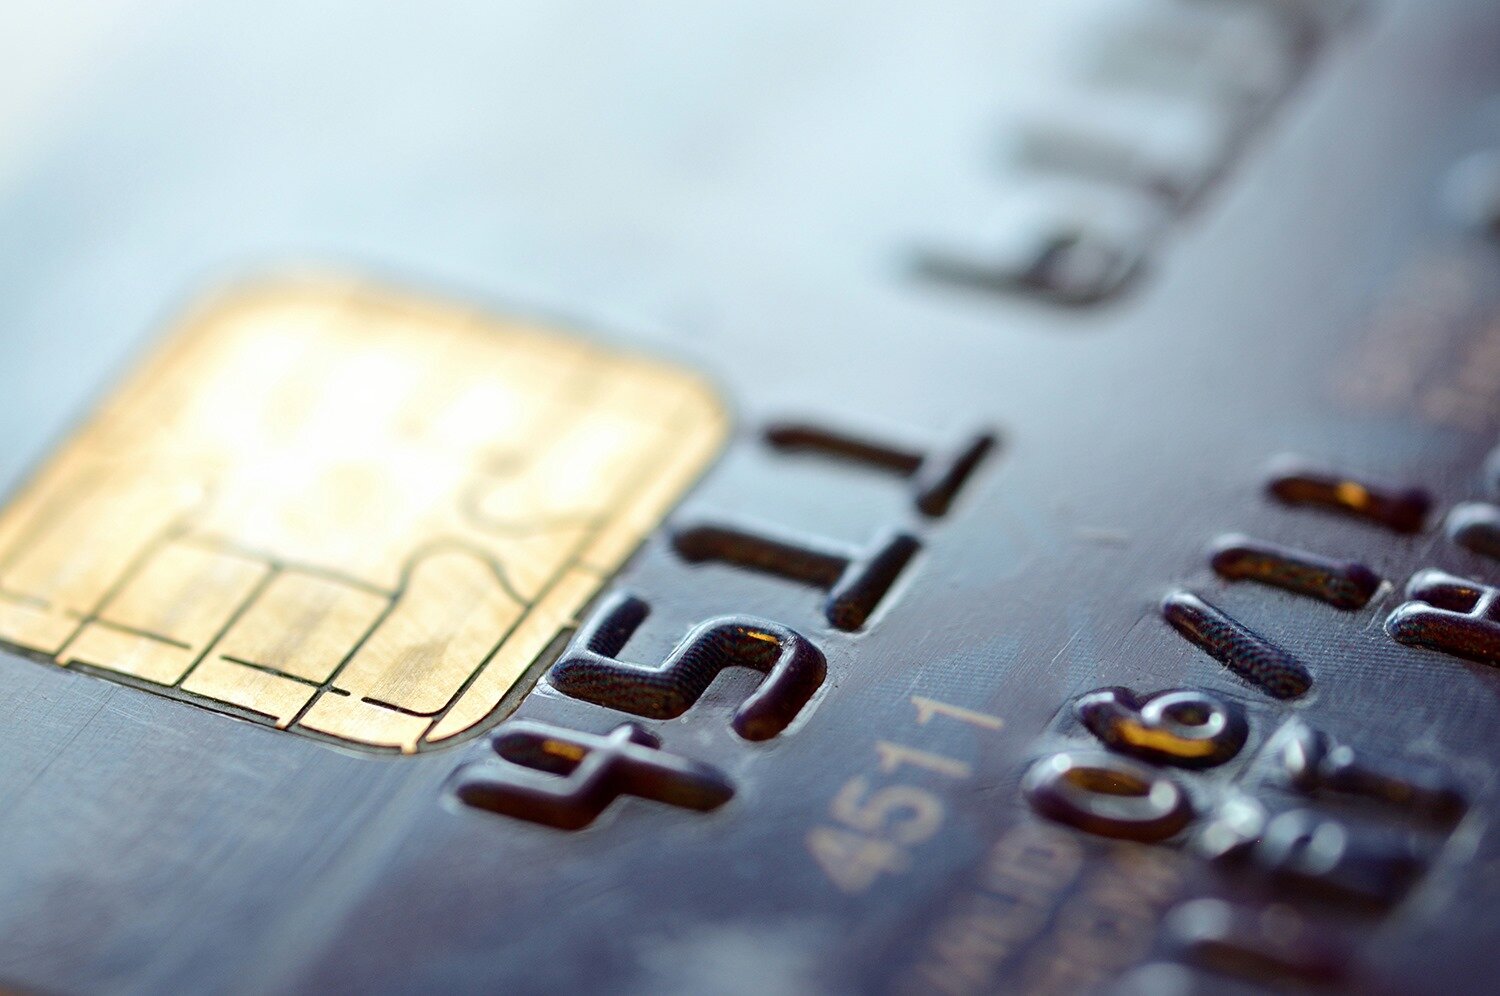 close up image of credit card. photo: helcim facebook page